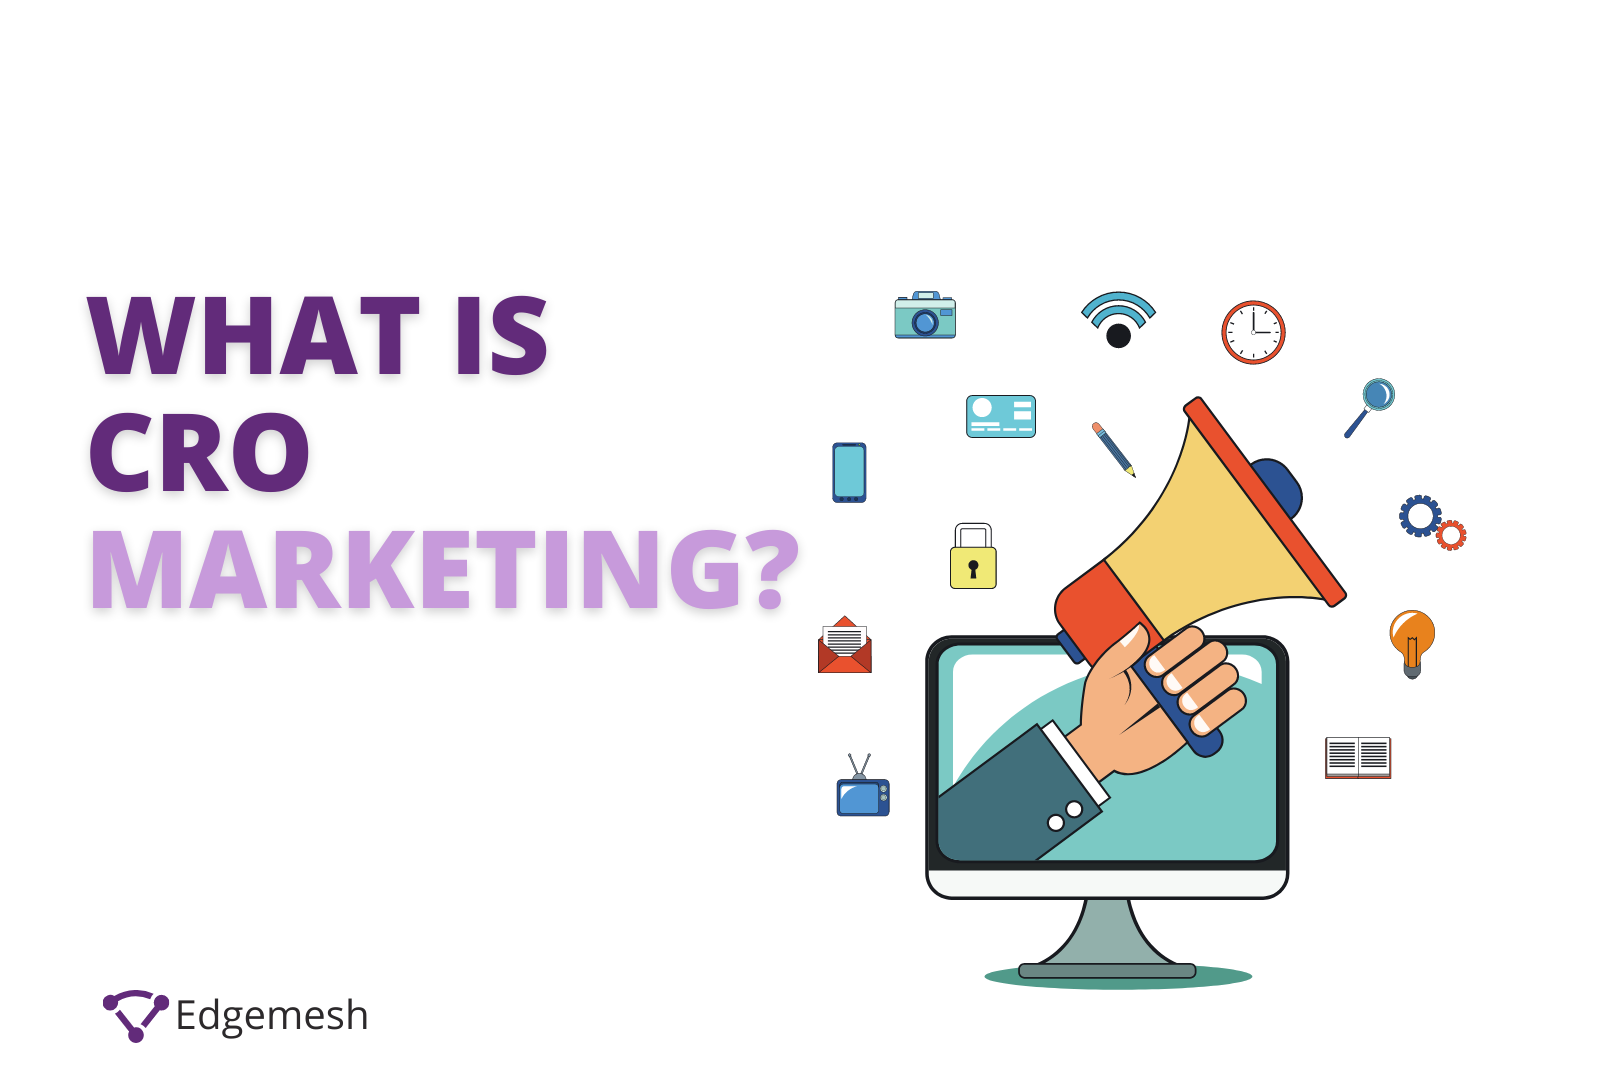 What is CRO Marketing?